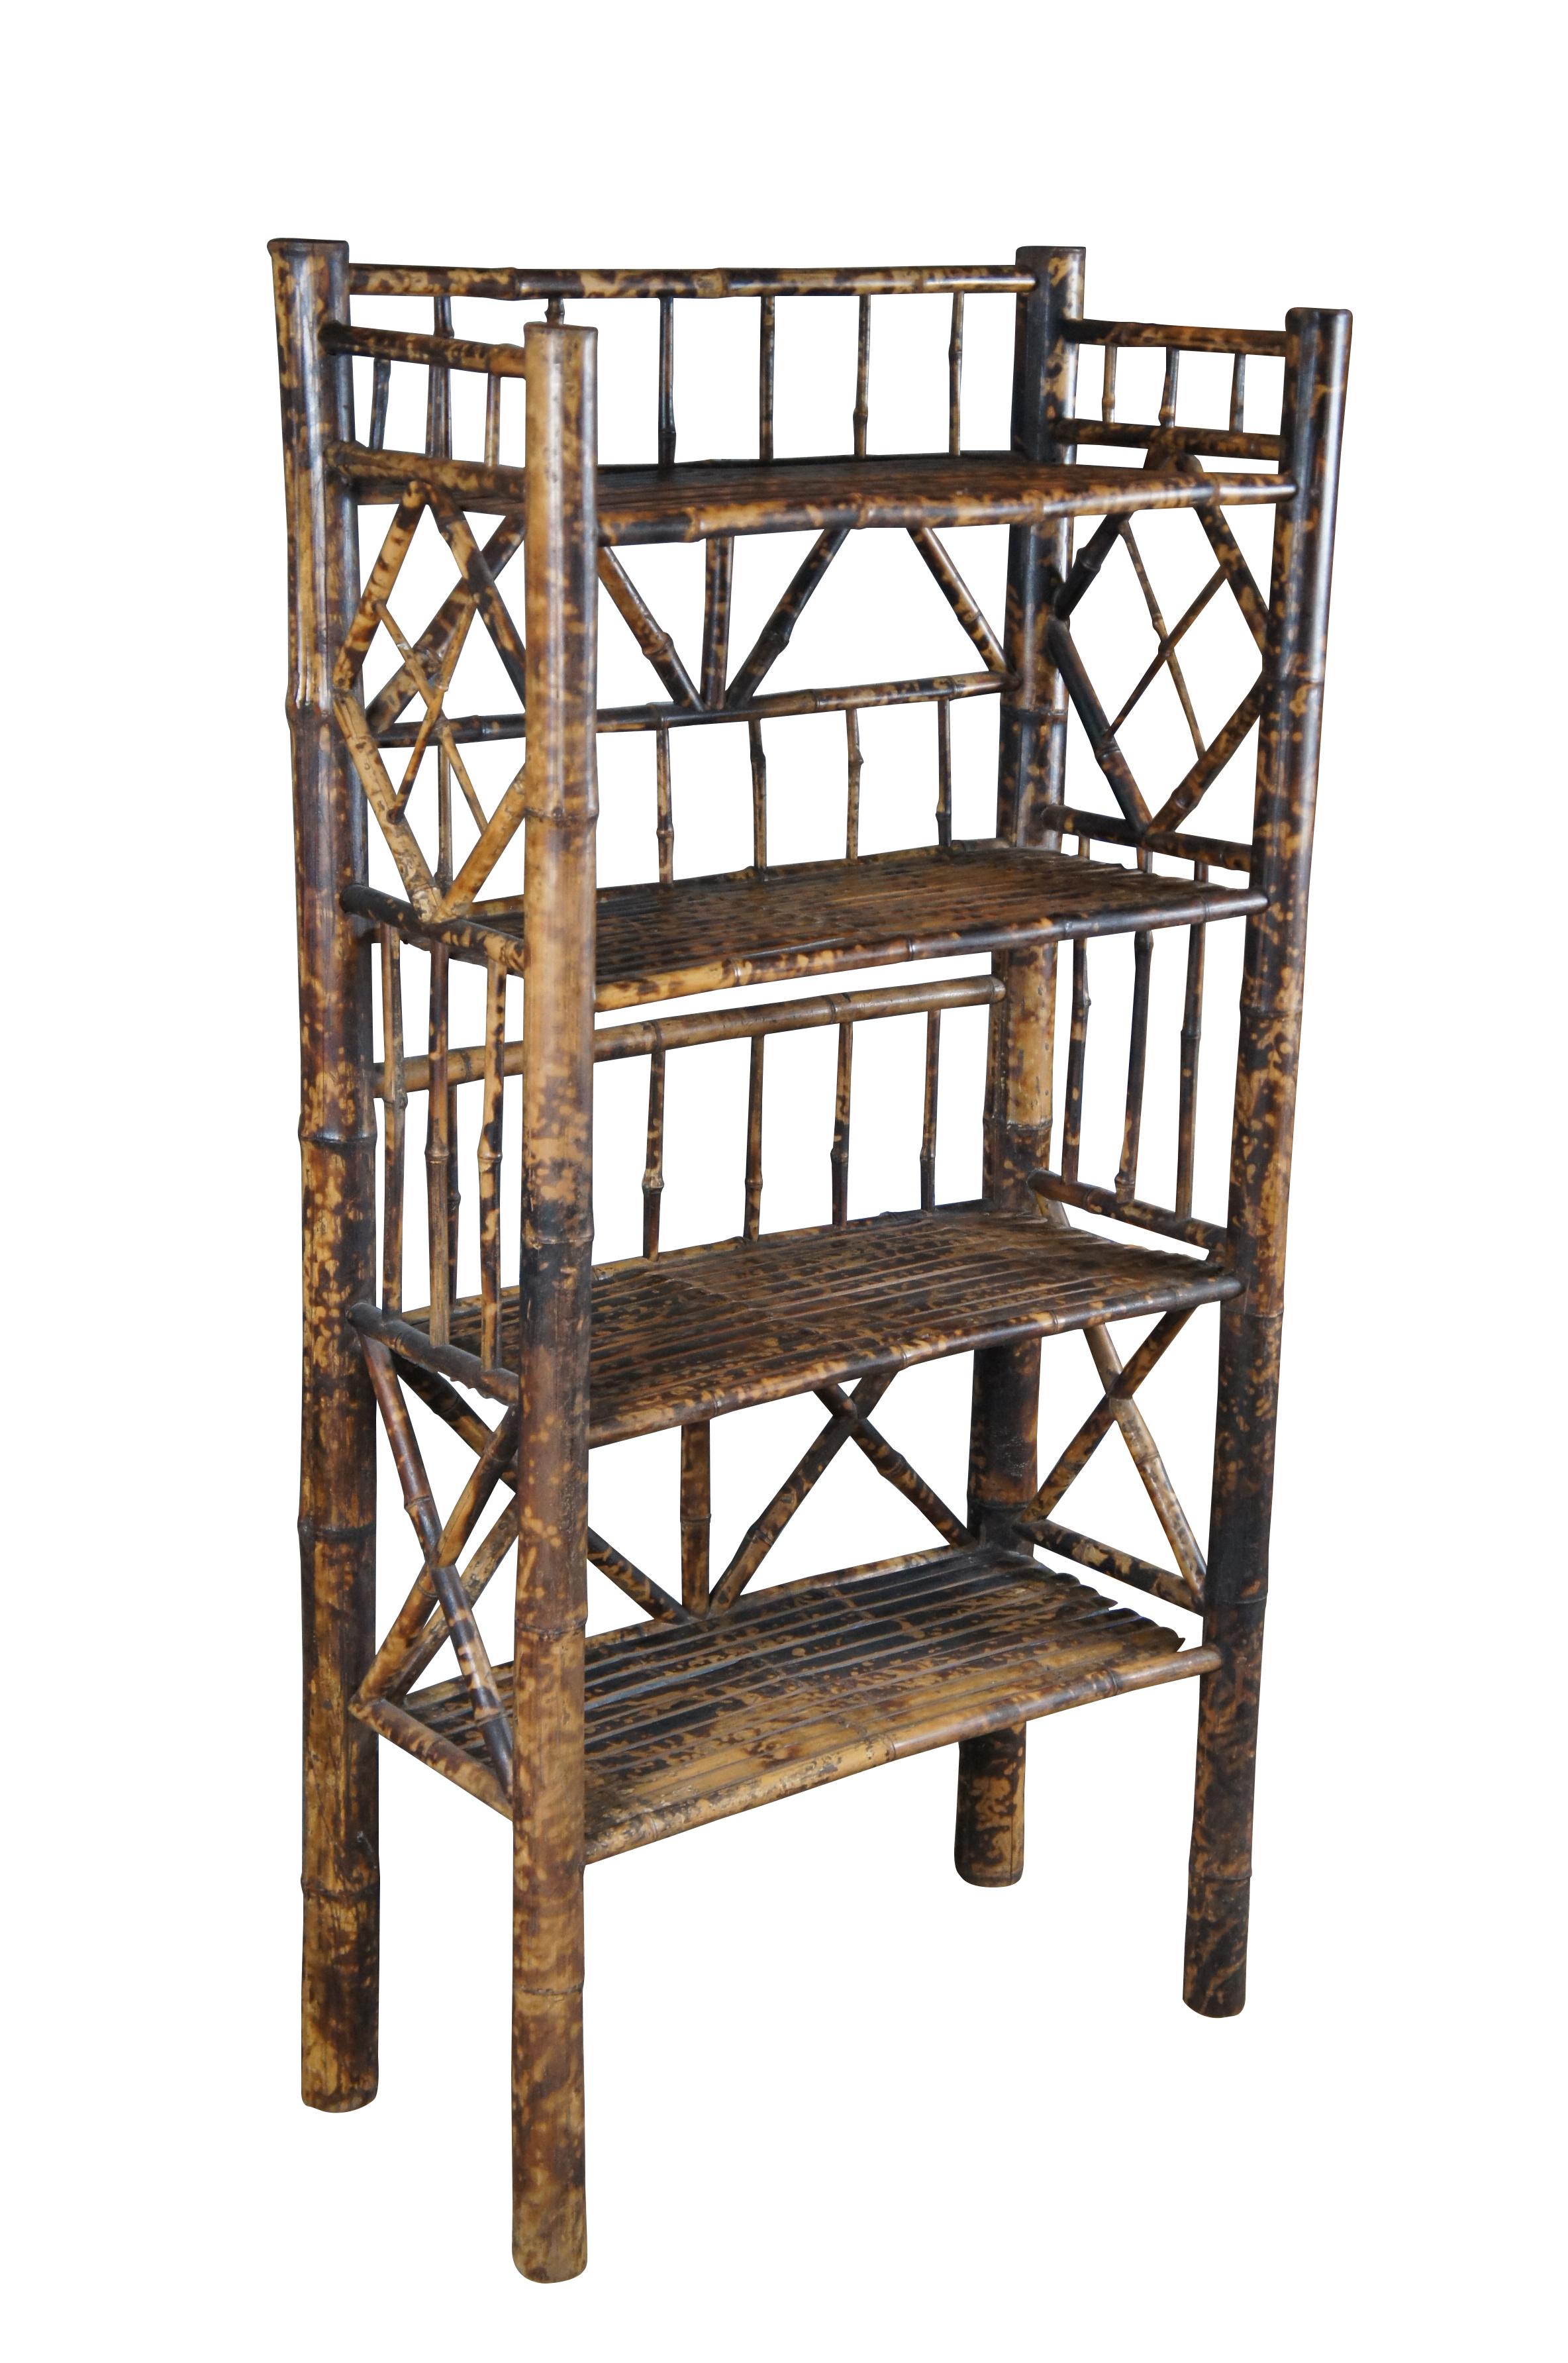 Antique Victorian bamboo library bookcase / etagere stand.  Made of bamboo featuring a scorched / tortoise shell finish with four shelves, columns, and geometric pattern slats. 

Dimensions:
27